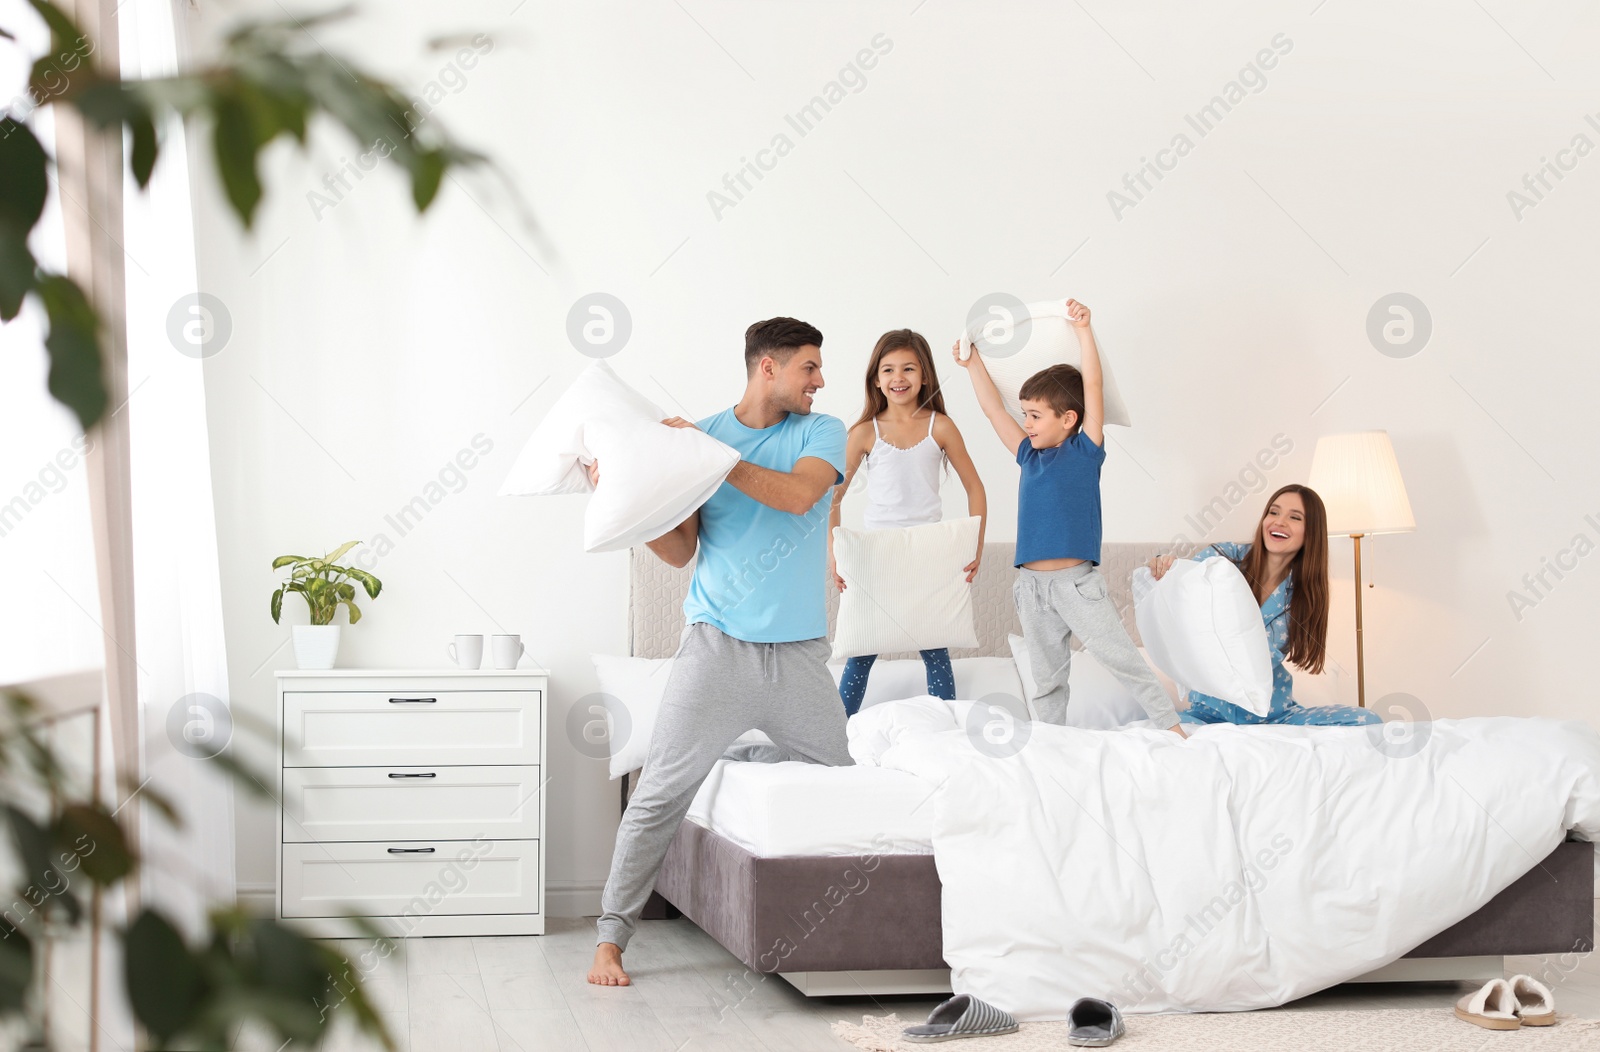 Photo of Happy family having pillow fight in bedroom